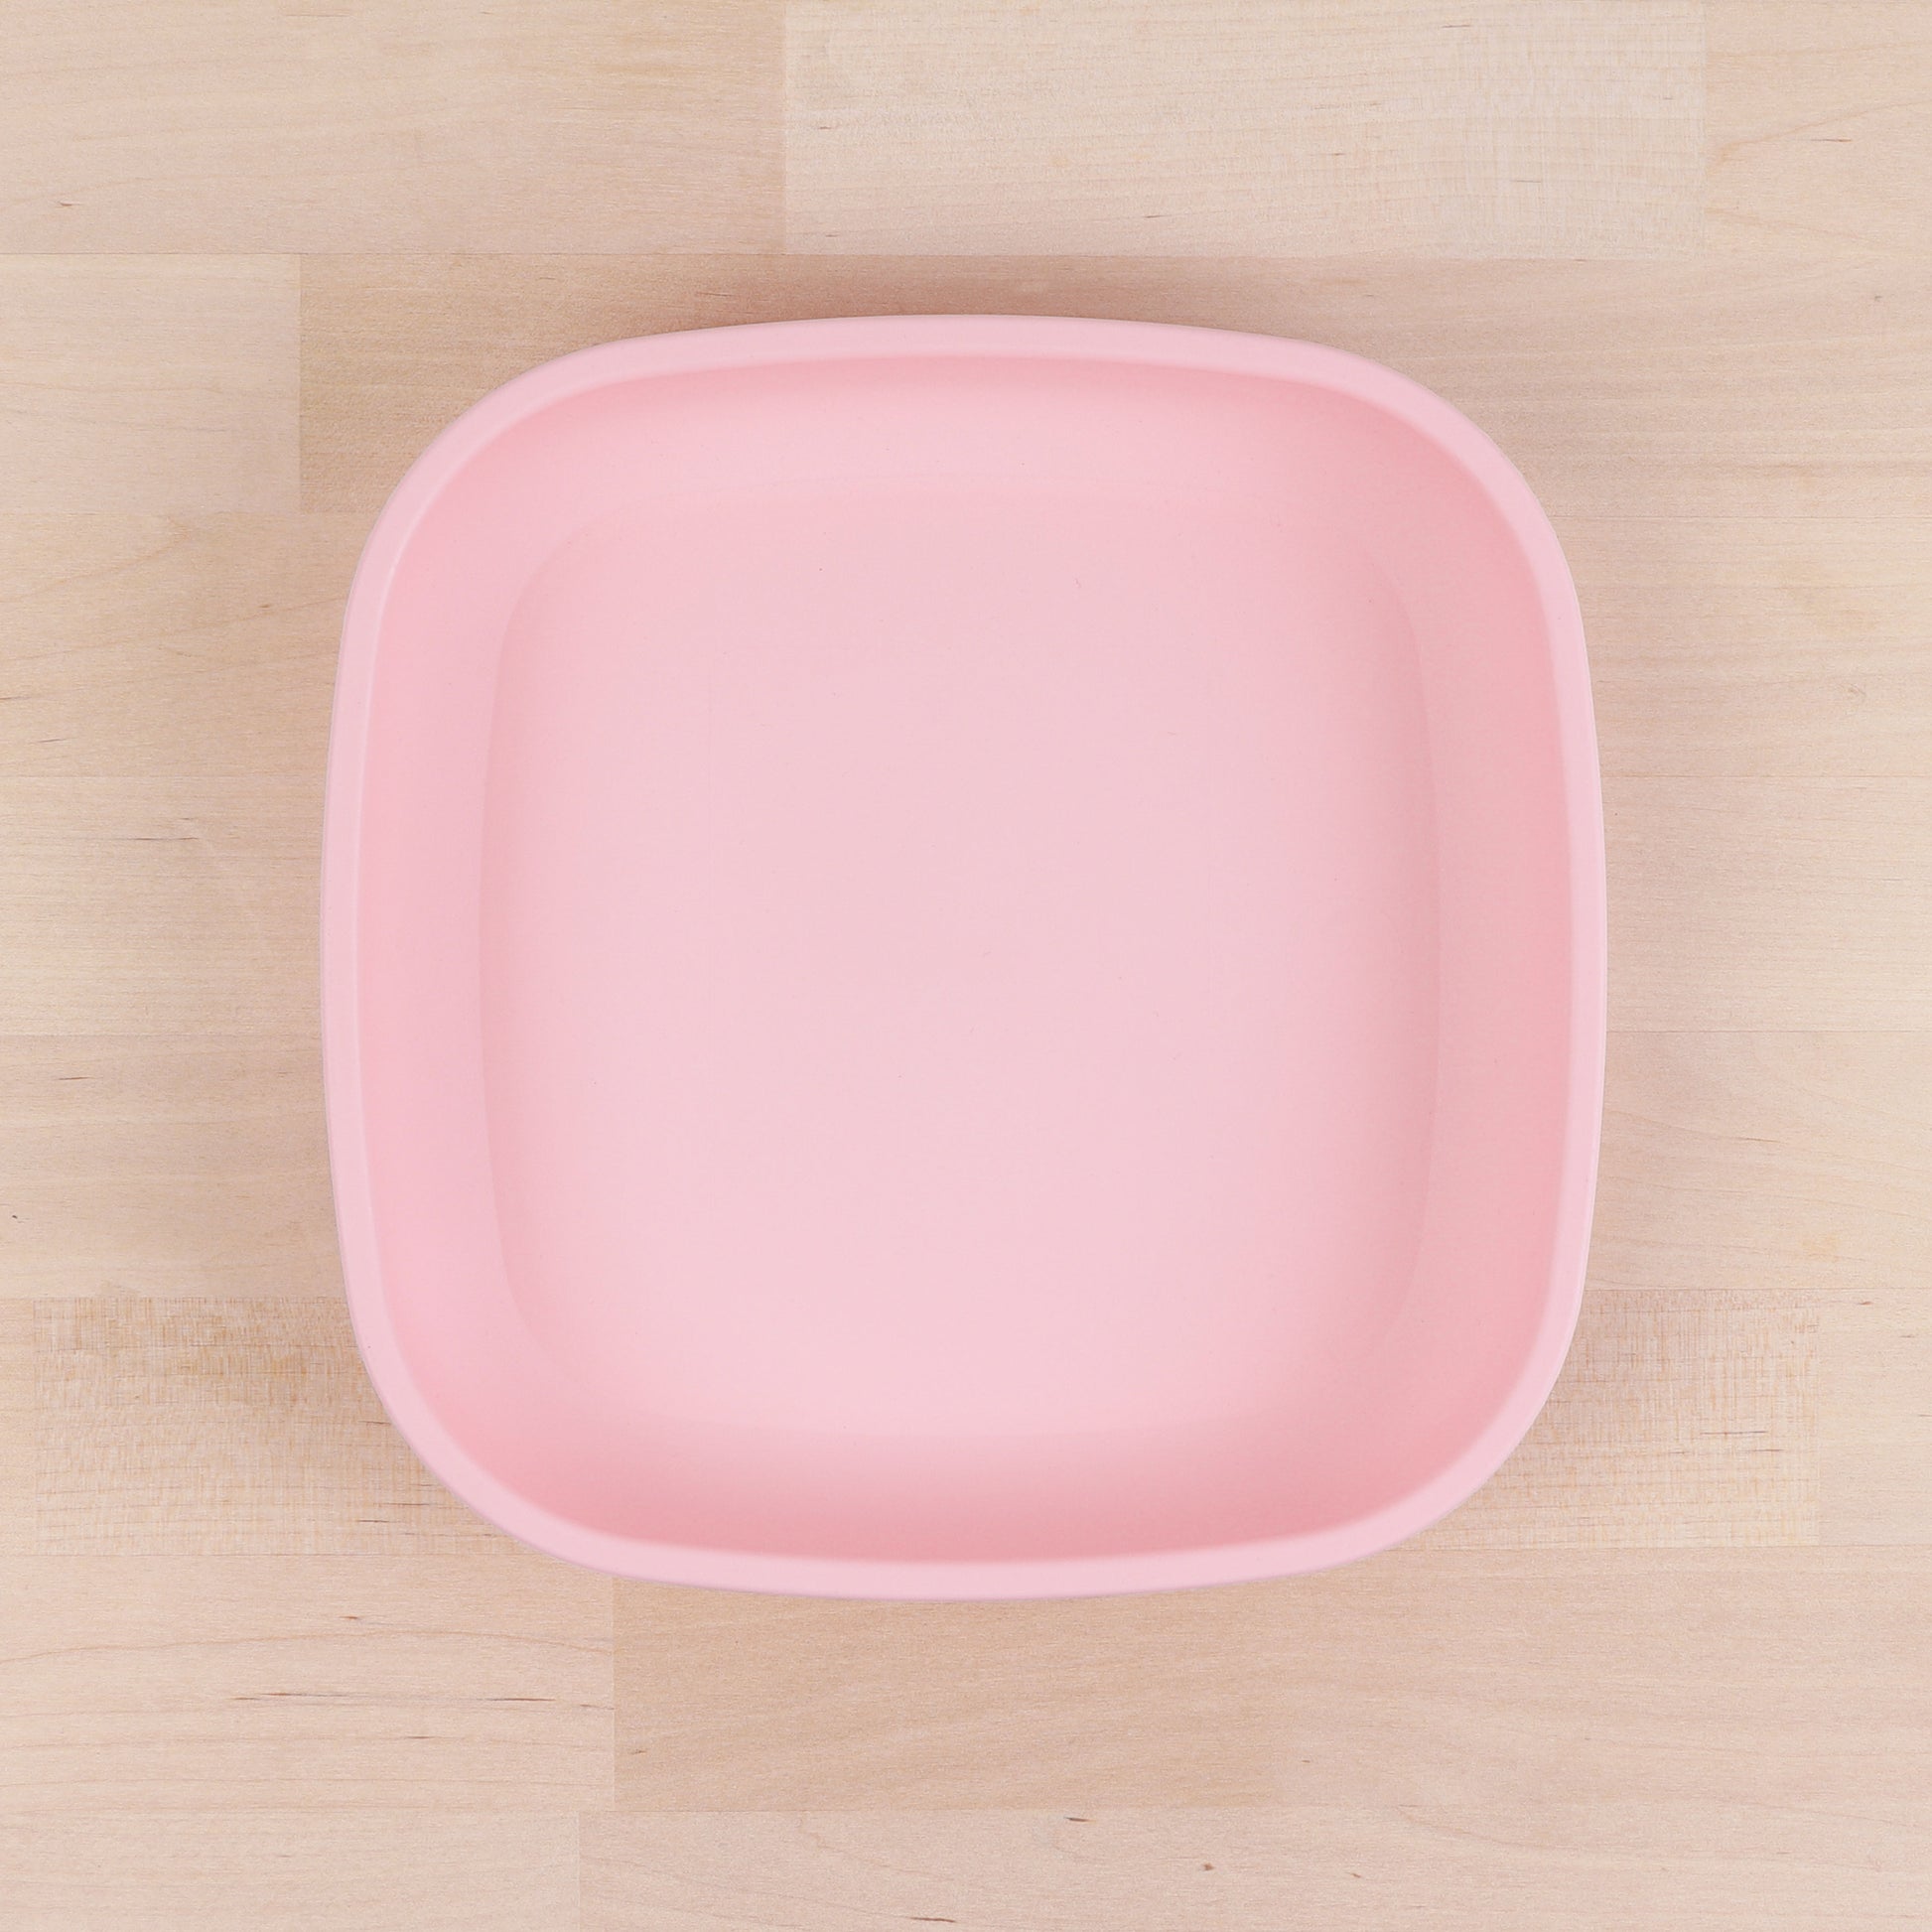 Re-Play Flat Plate Standard Size in Ice Pink from Bear & Moo